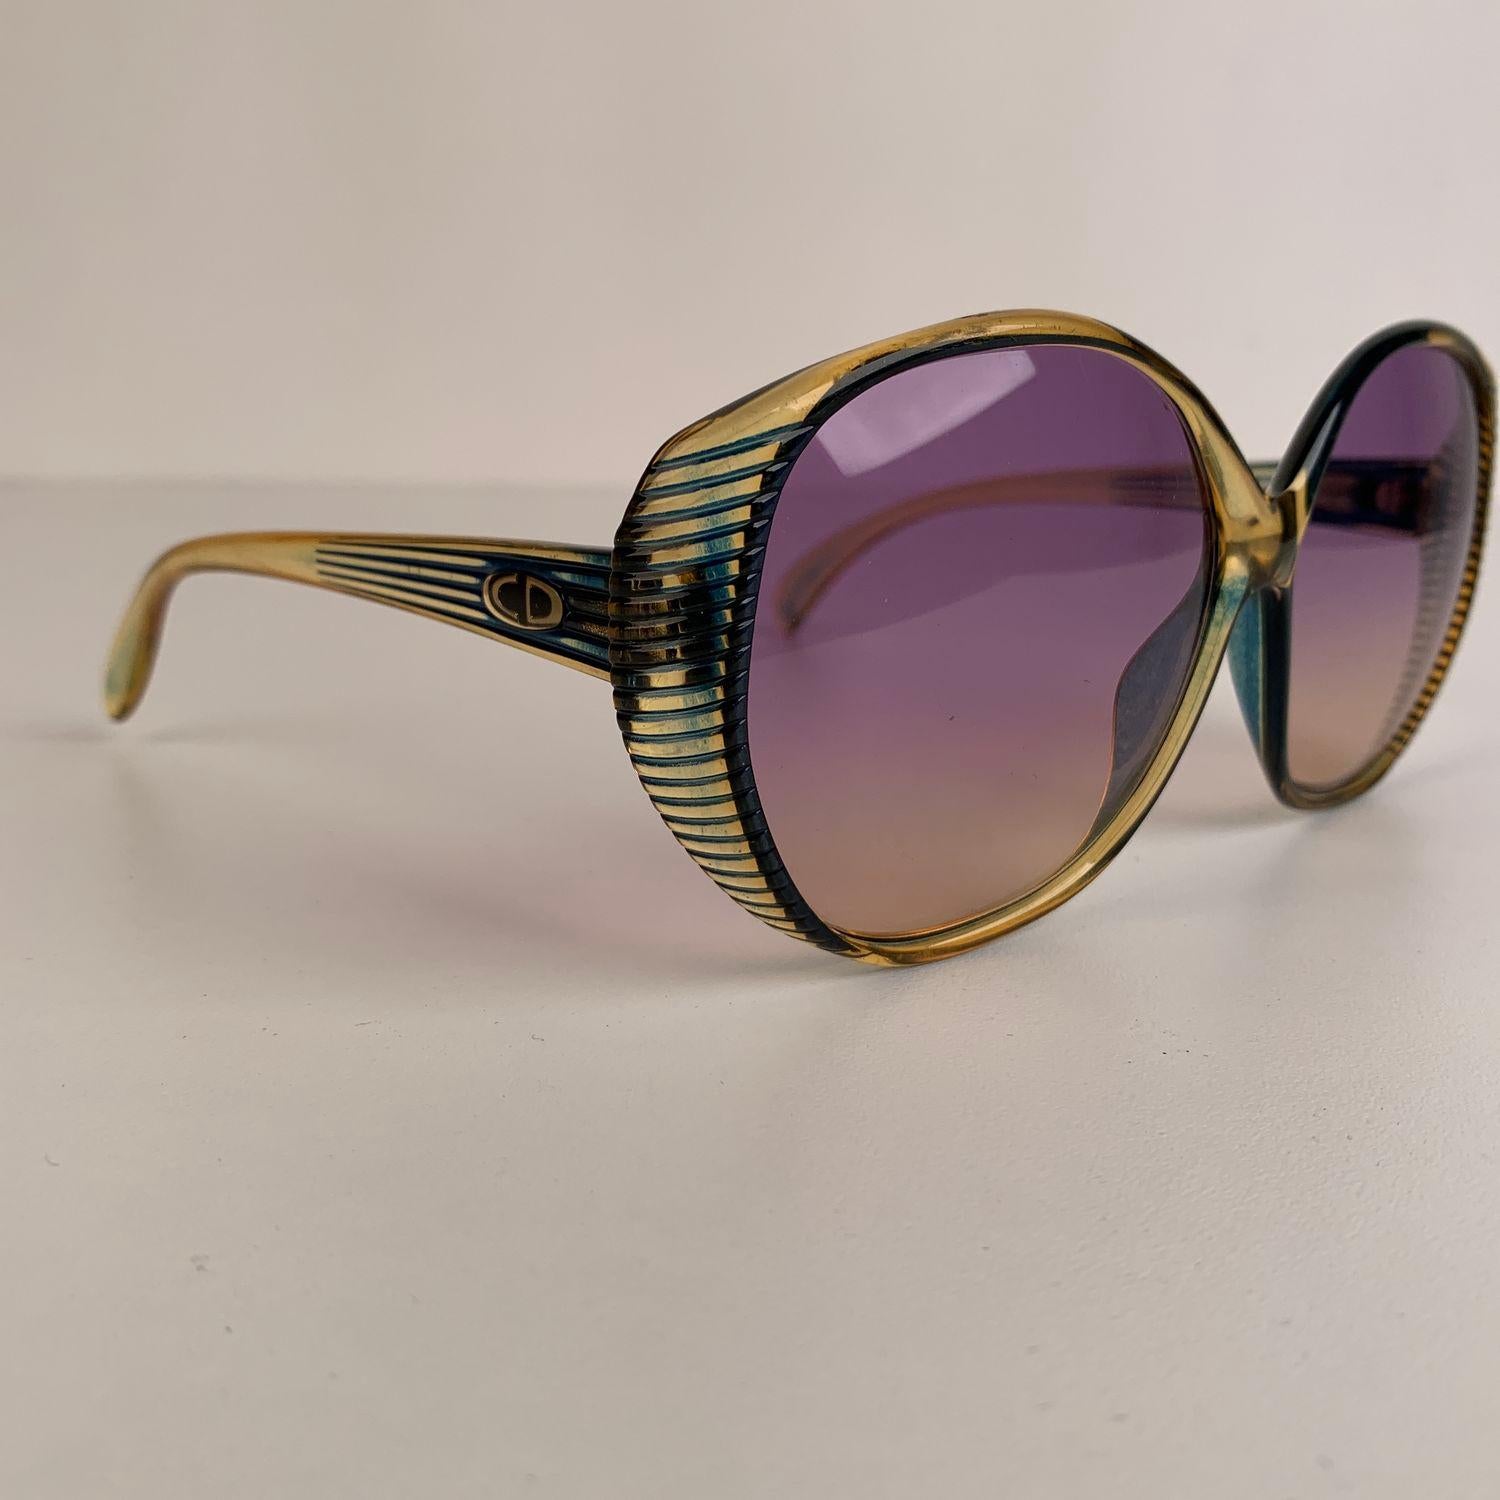 CHRISTIAN DIOR Vintage 1970s Oversized green and semi transparent honey color frame. Bicolor (purple and yellow - gradient) new lenses. Optyl frame, handmade in Germany.



Details

MATERIAL: Optyl

COLOR: Green

MODEL: 2061

GENDER: Women

SIZE: